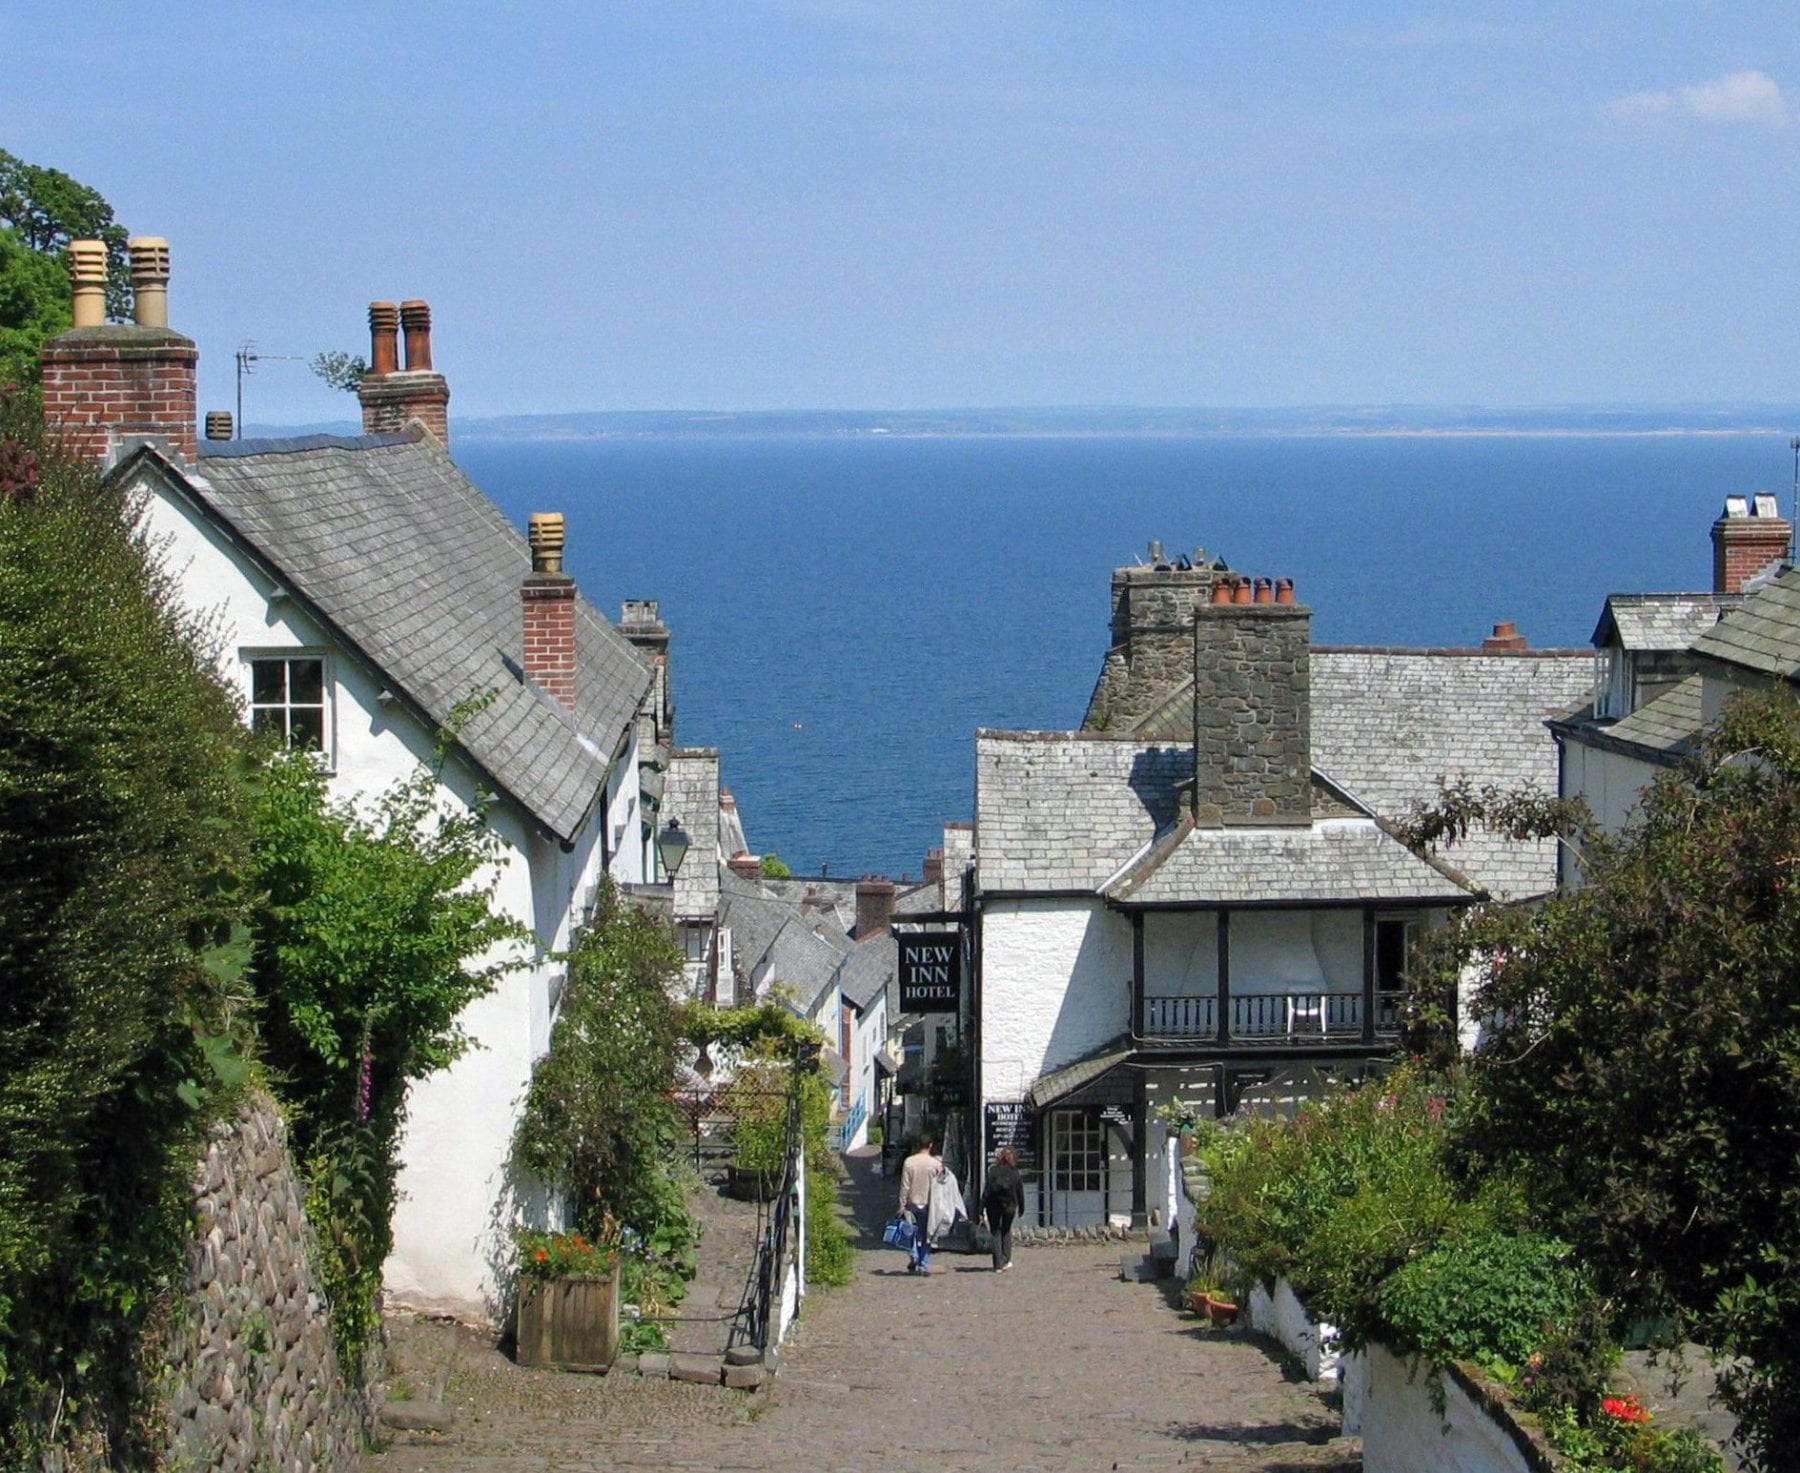 Clovelly's New Inn lies in the heart of the village